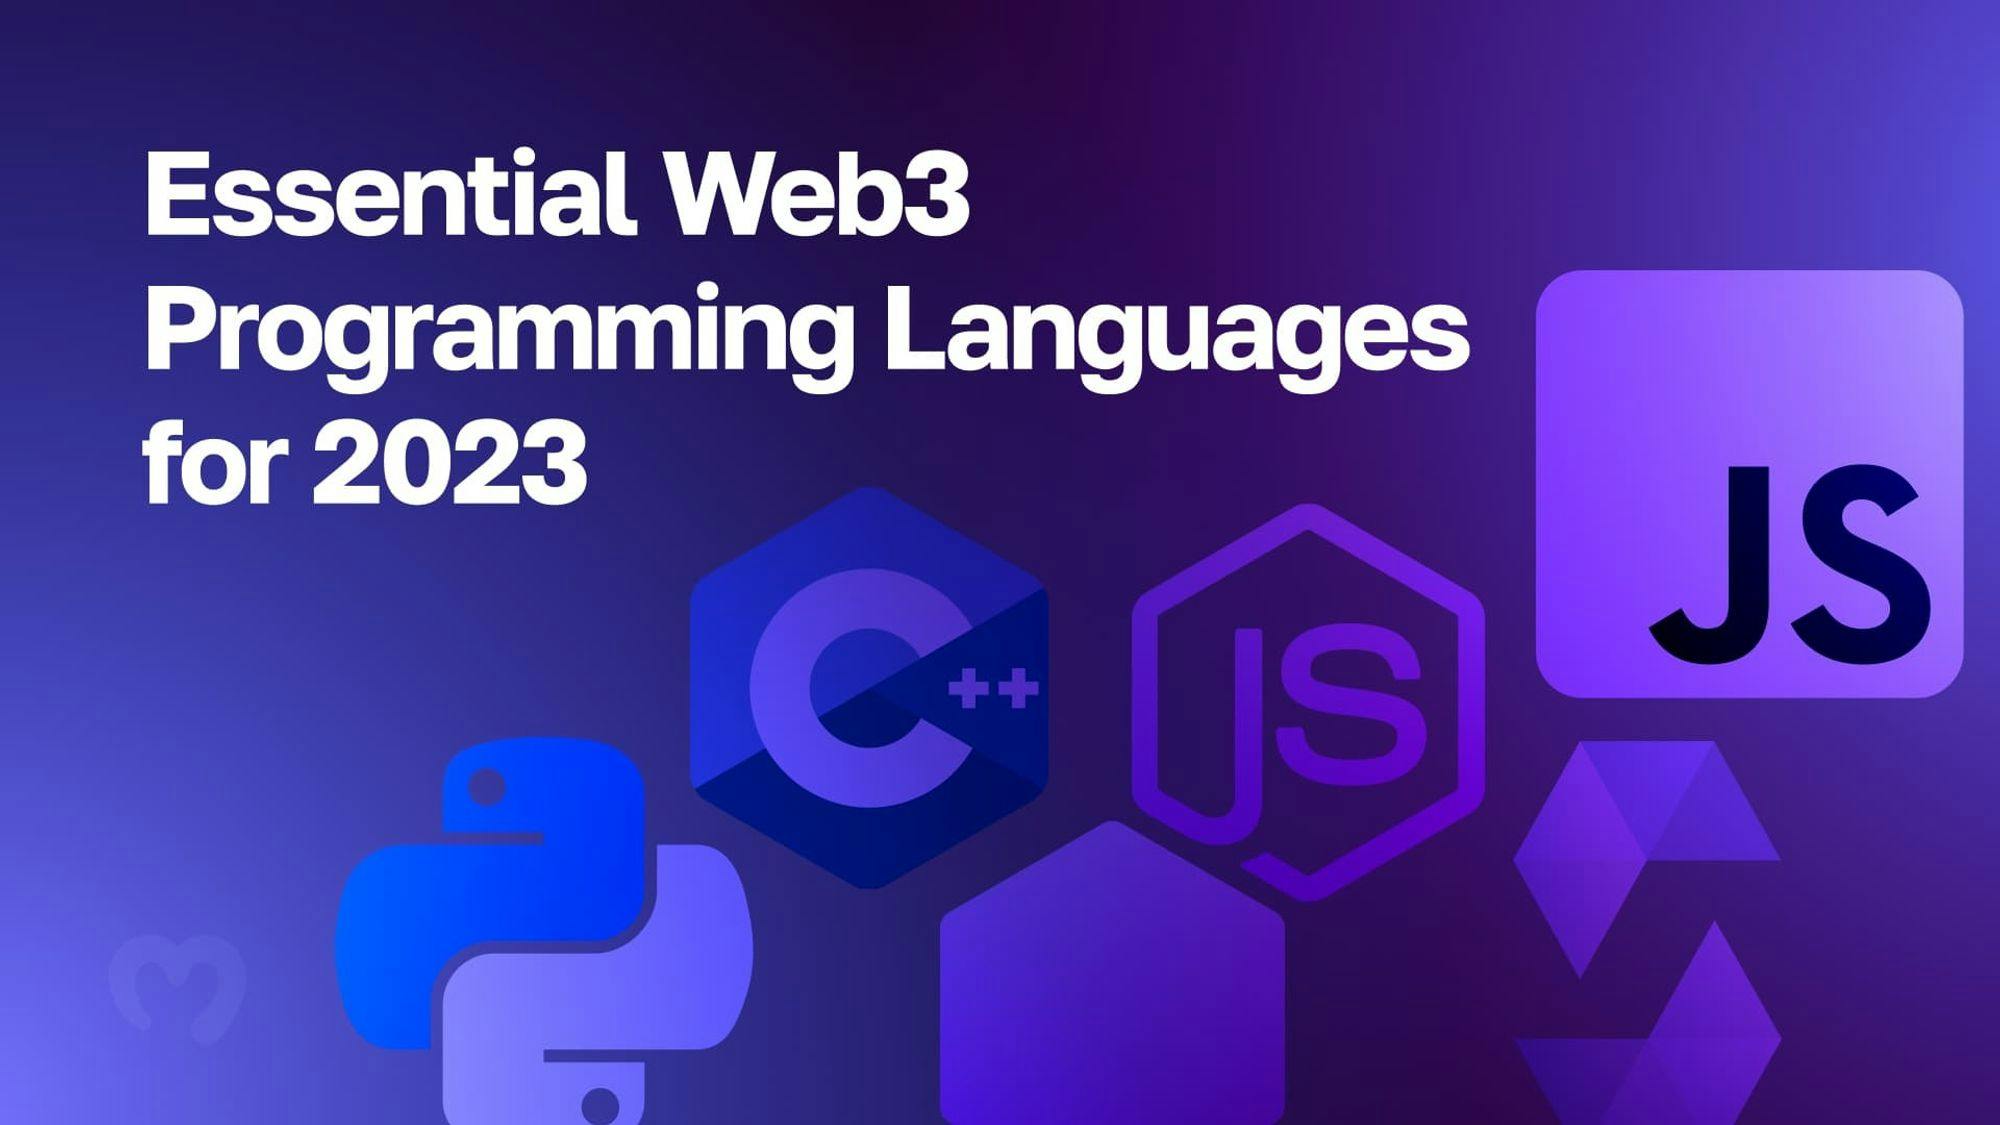 Essential Web3 Programming Languages for 2023